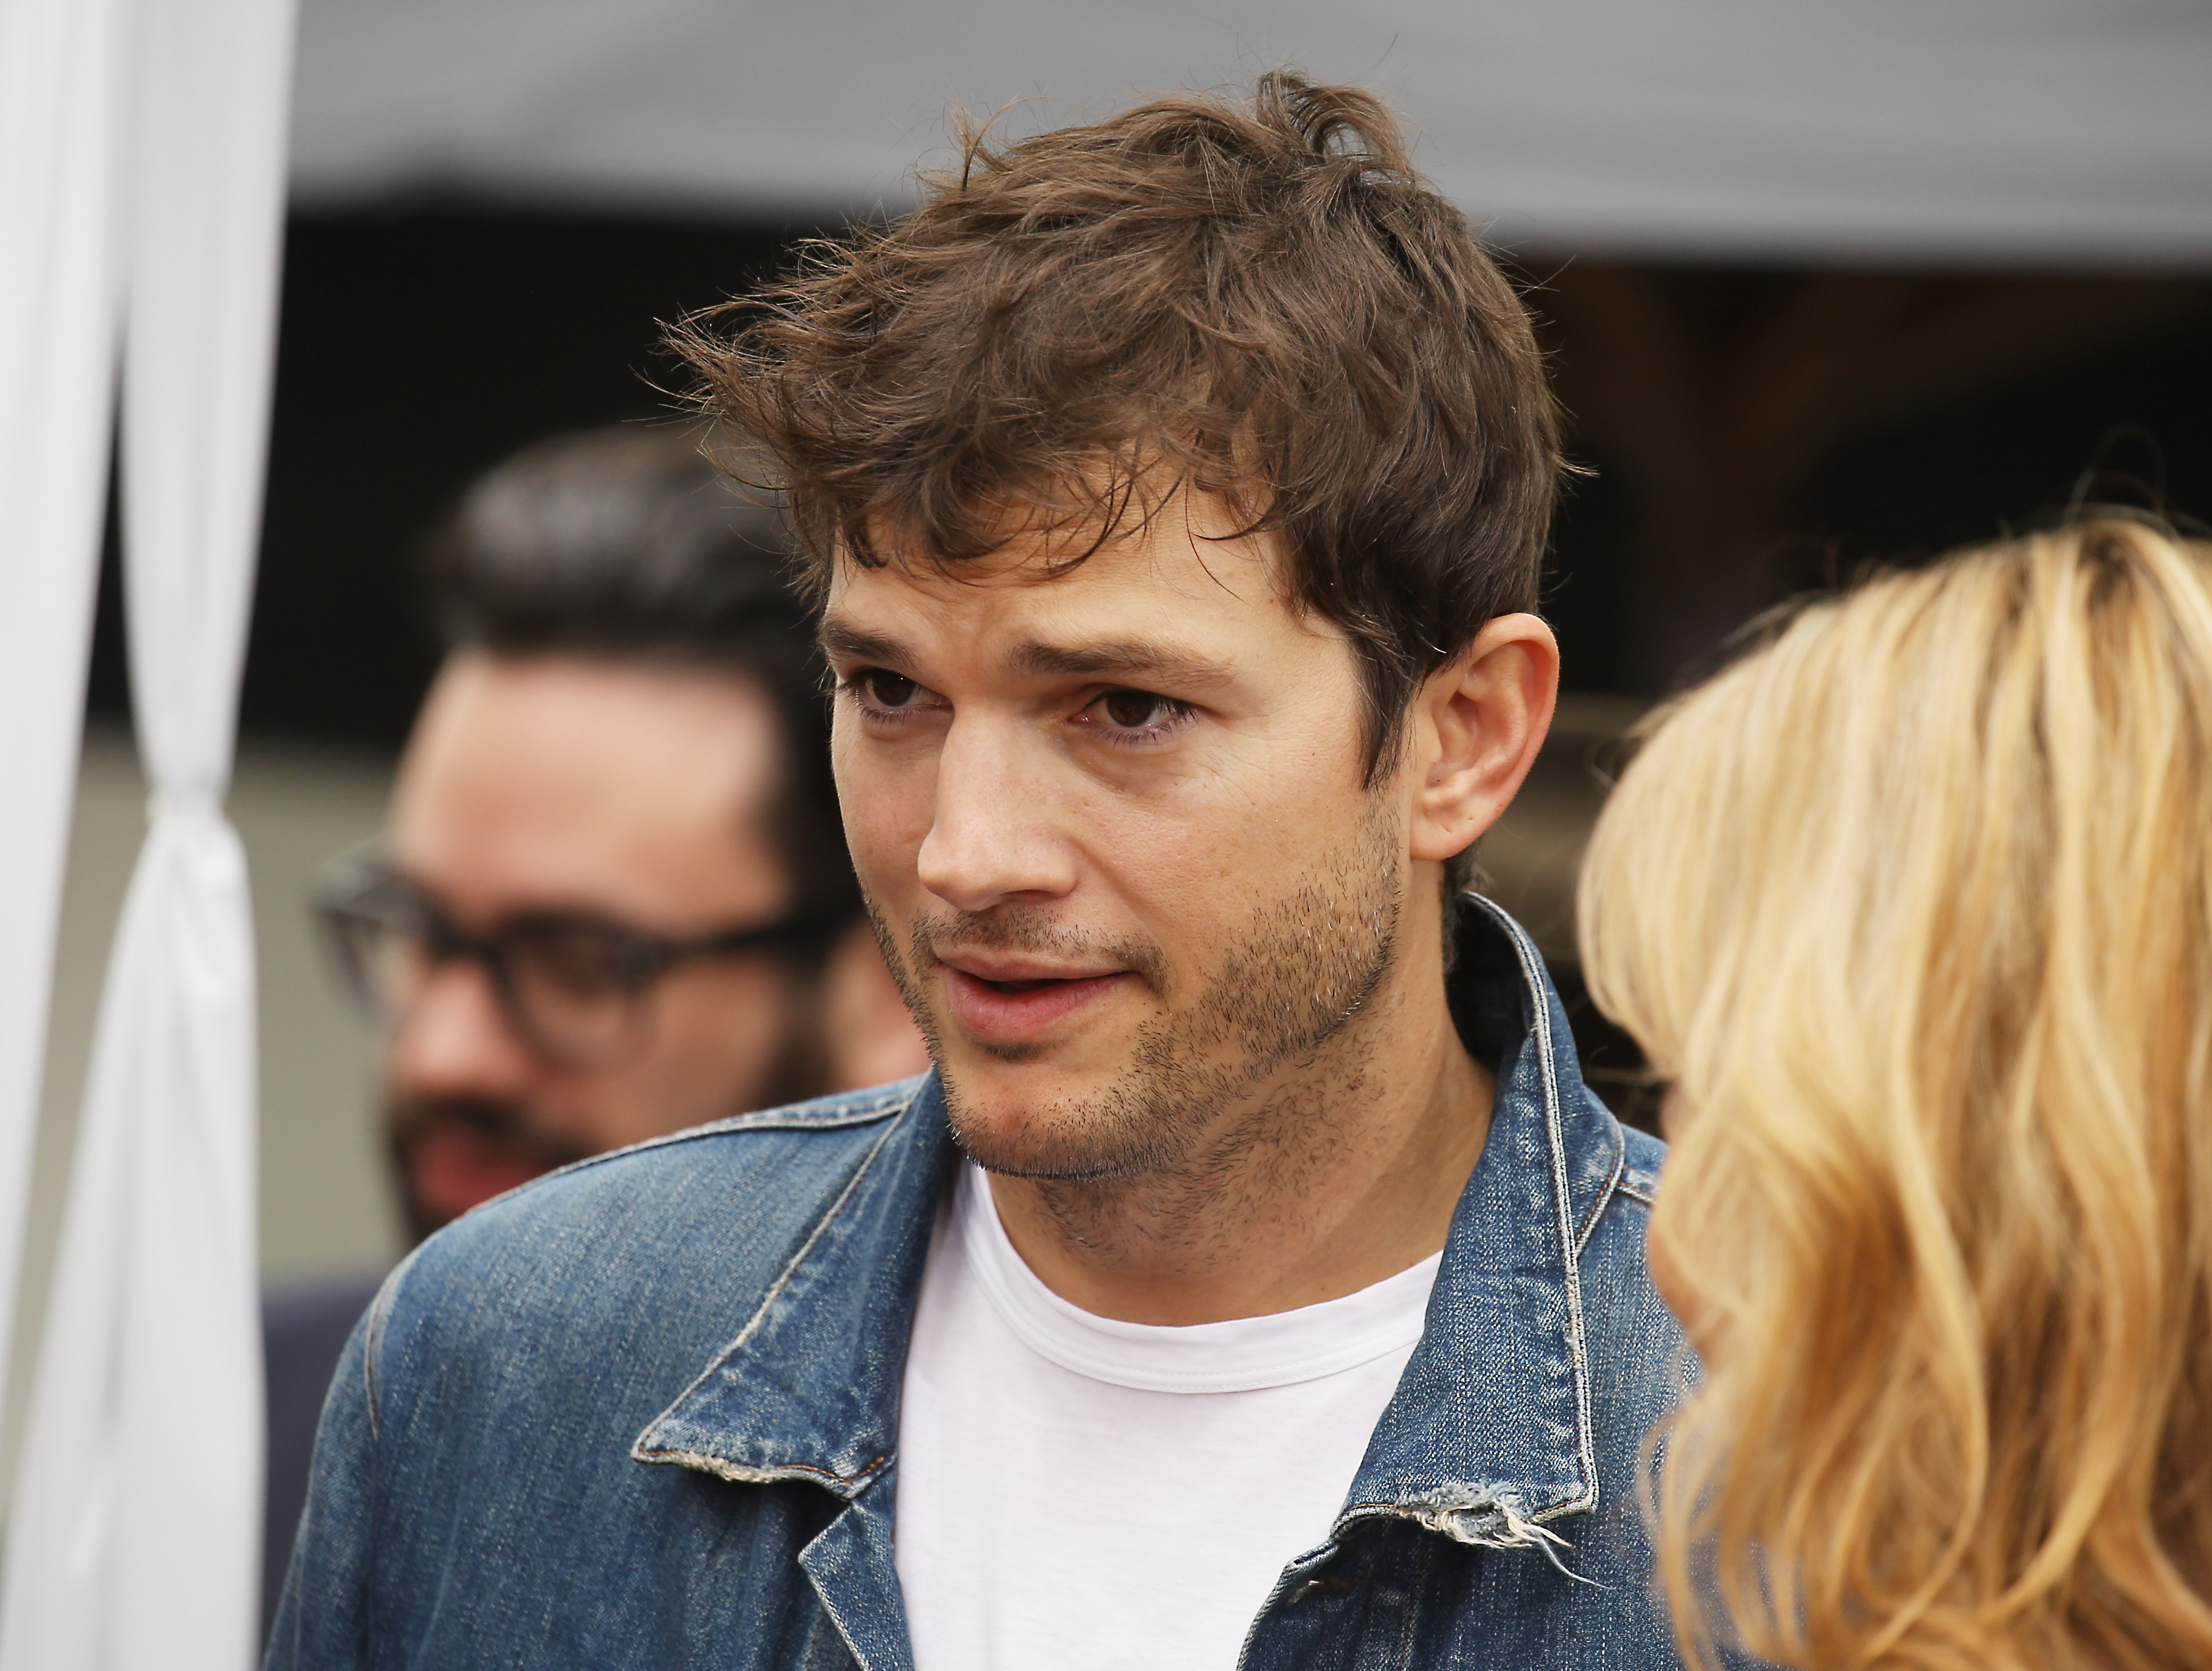 Ashton Kutcher on January 07, 2019, in Hollywood, California | Source: Getty Images